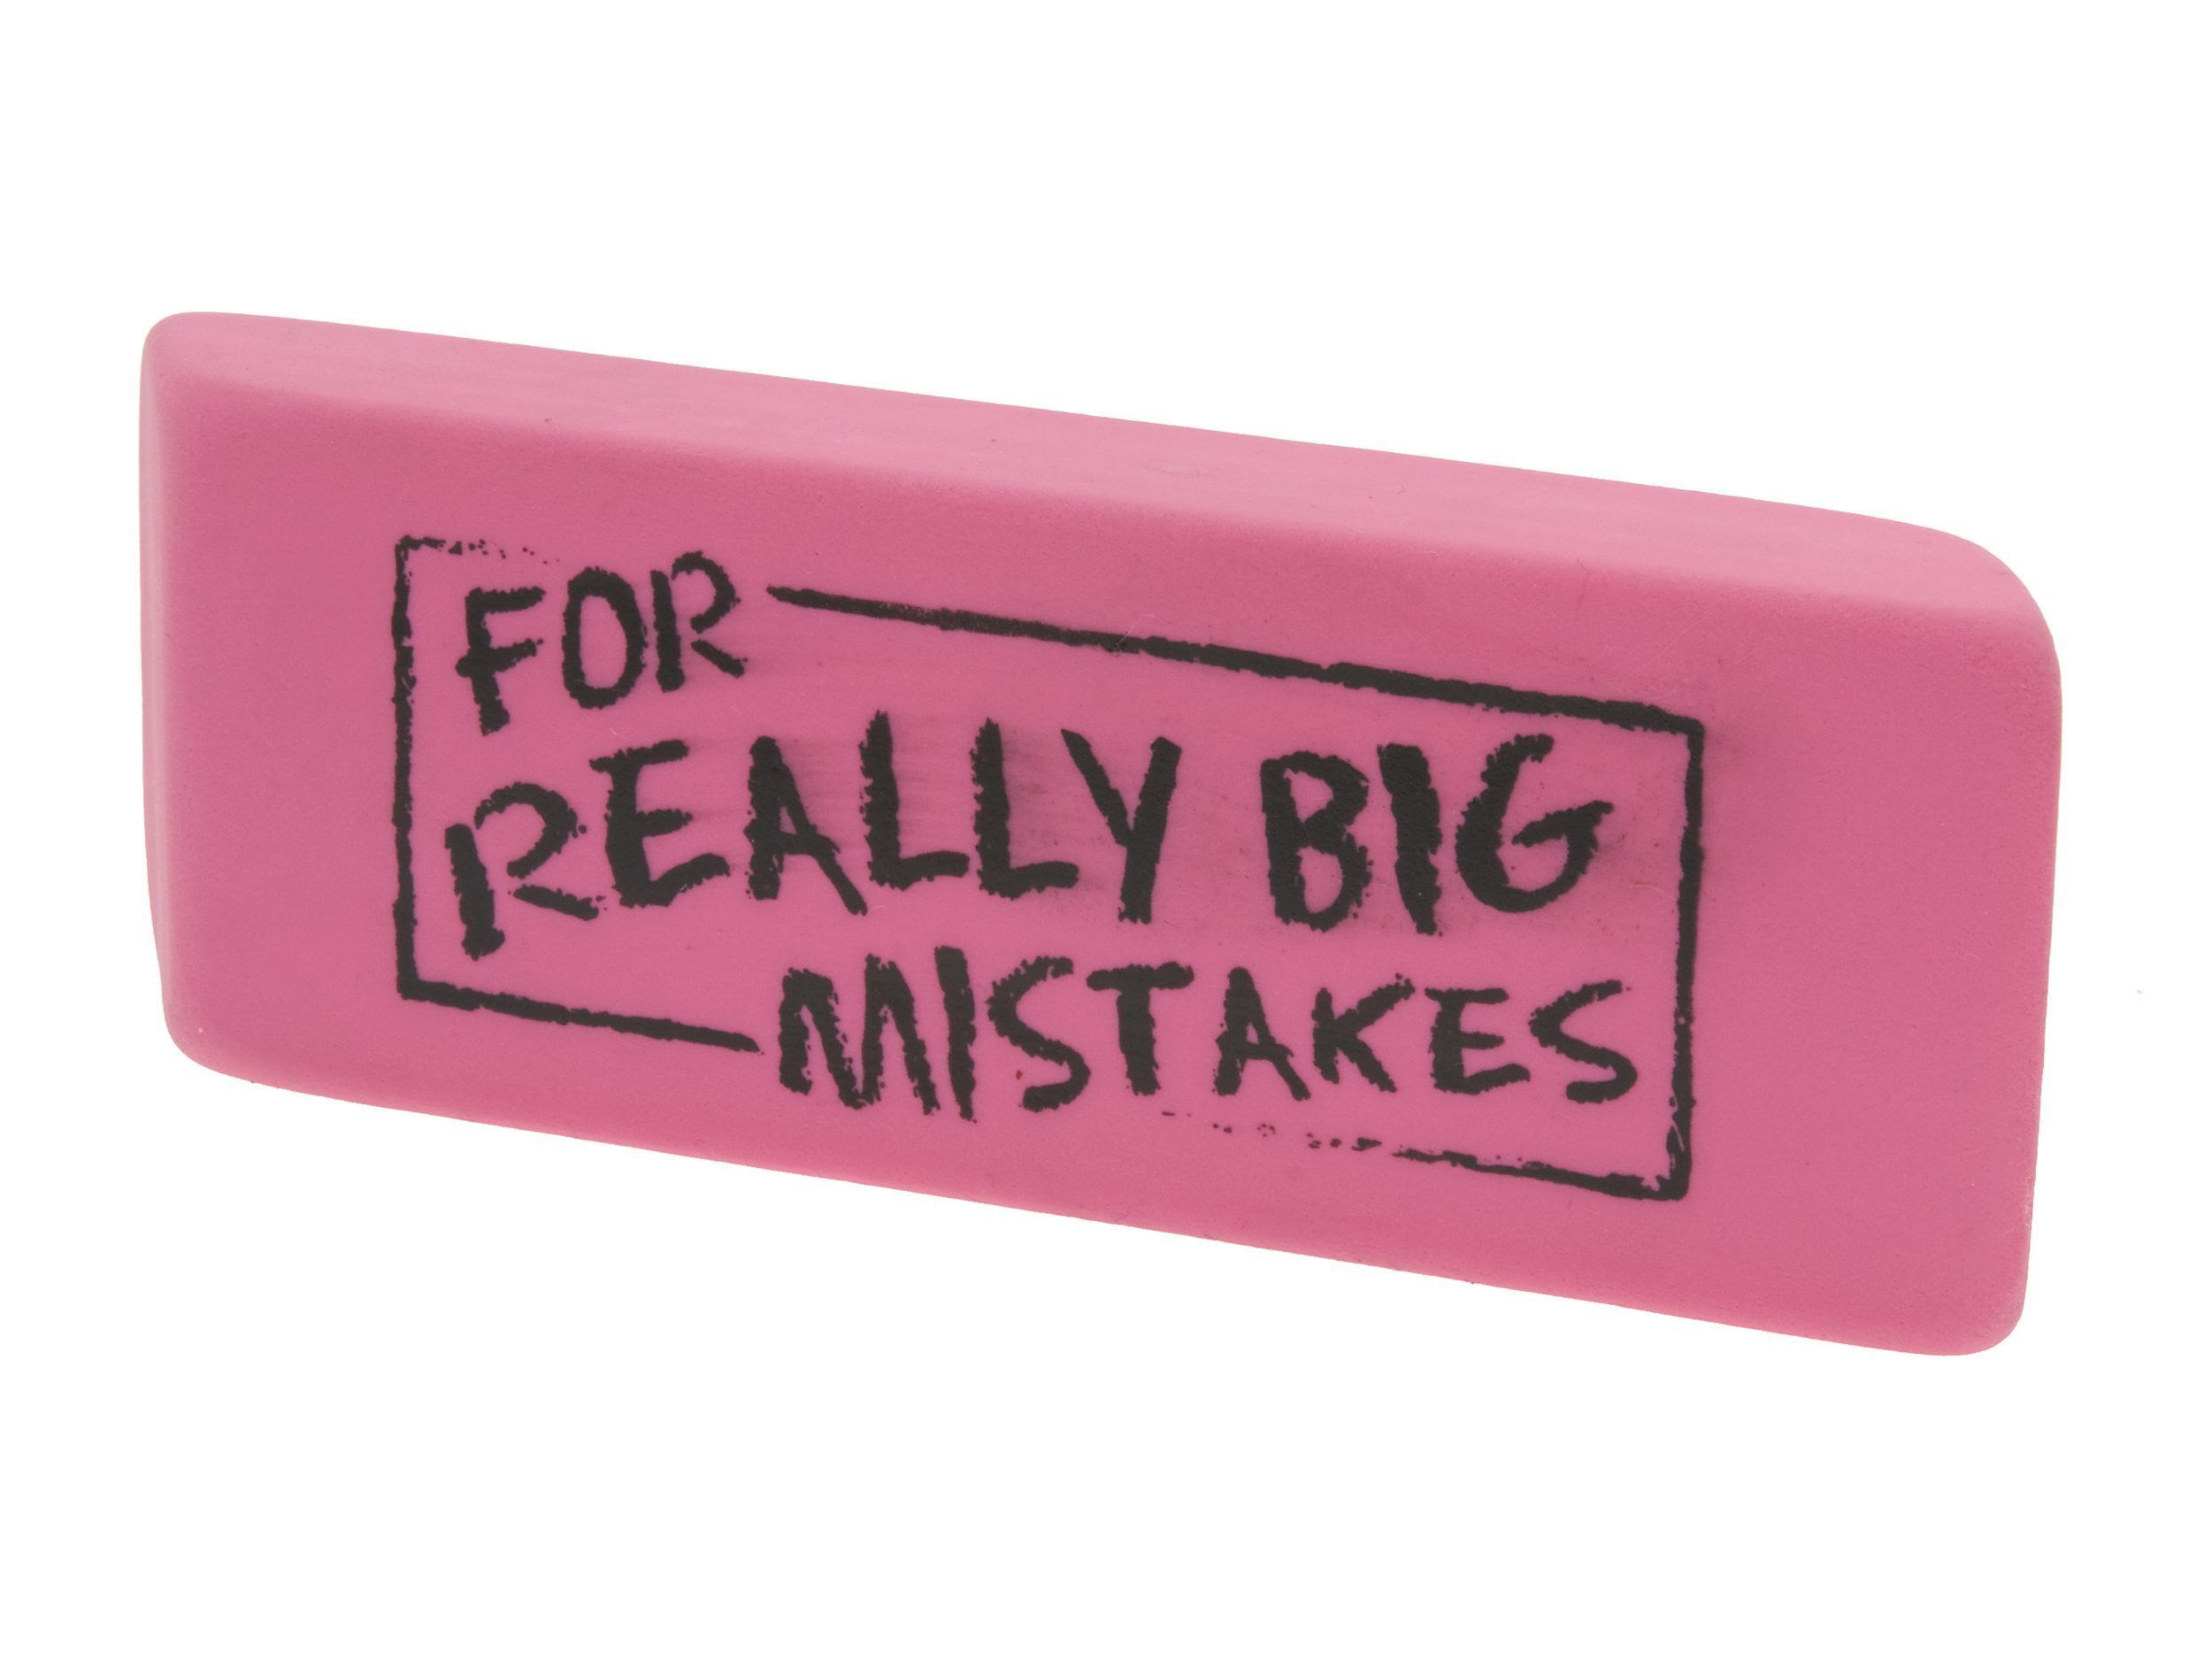 Oops My Bad For Big Mistakes Not Again Jumbo Novelty Erasers 5.5"X1.75" Select